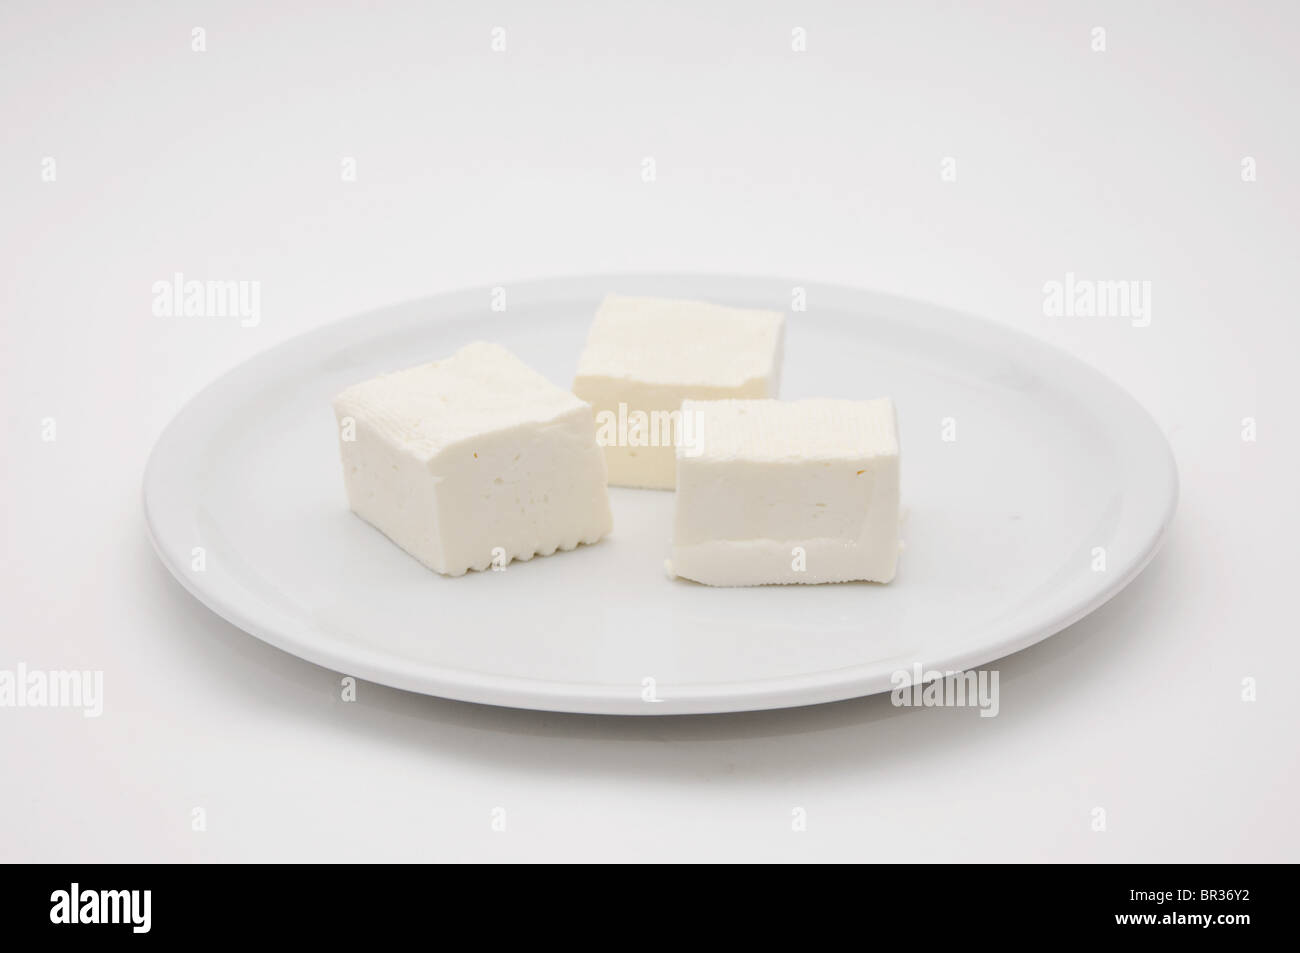 Fresh and tasty goat cheese served on a white plate. Stock Photo